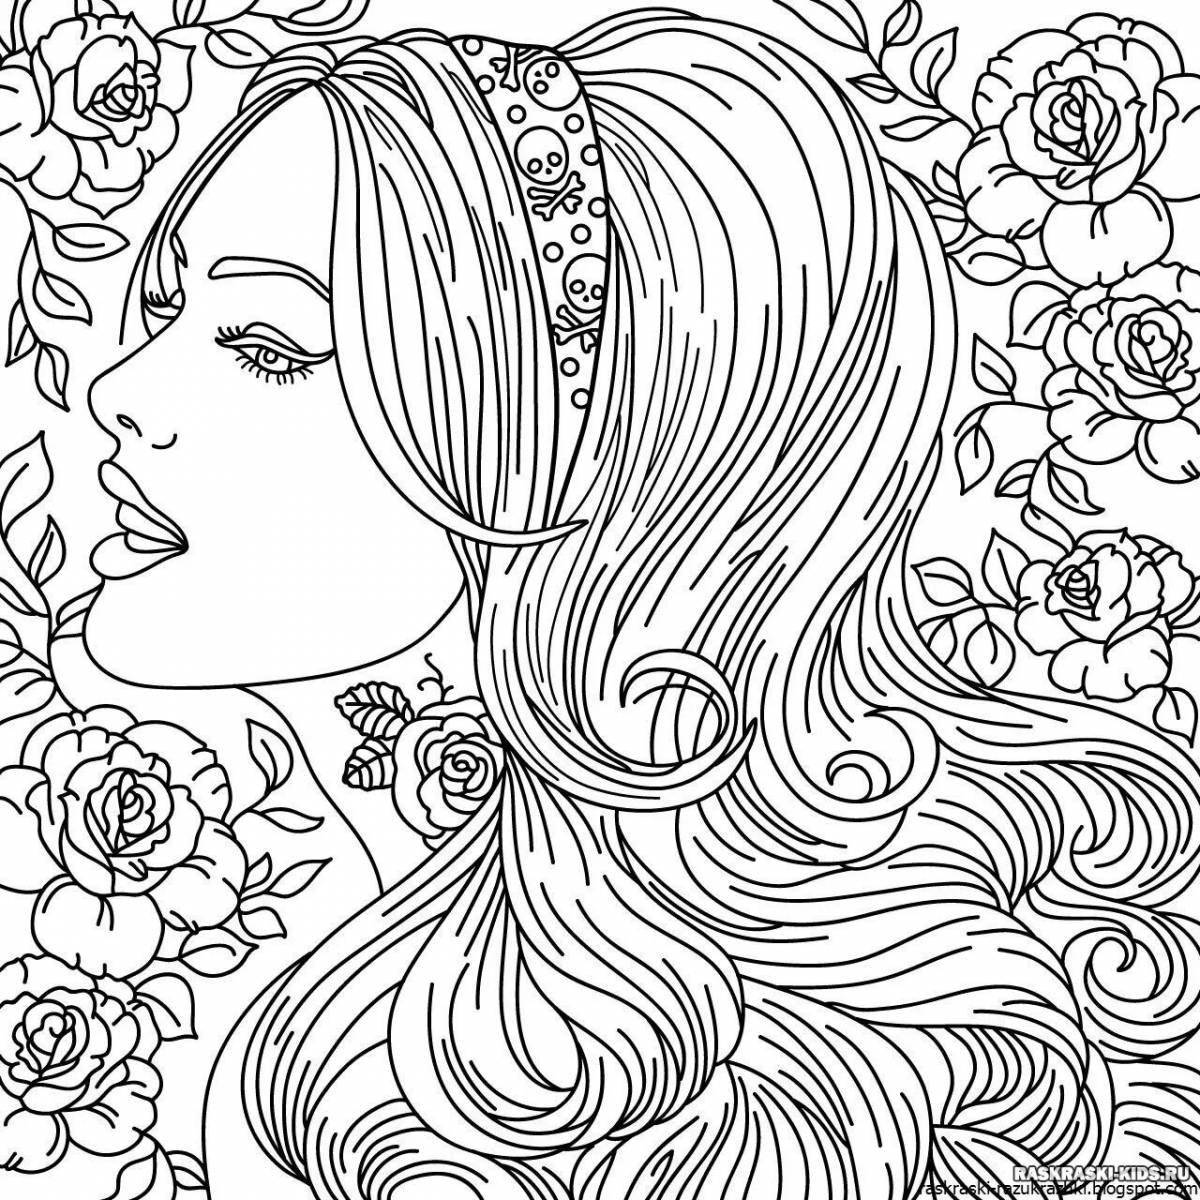 A fun 30 year old coloring book for girls